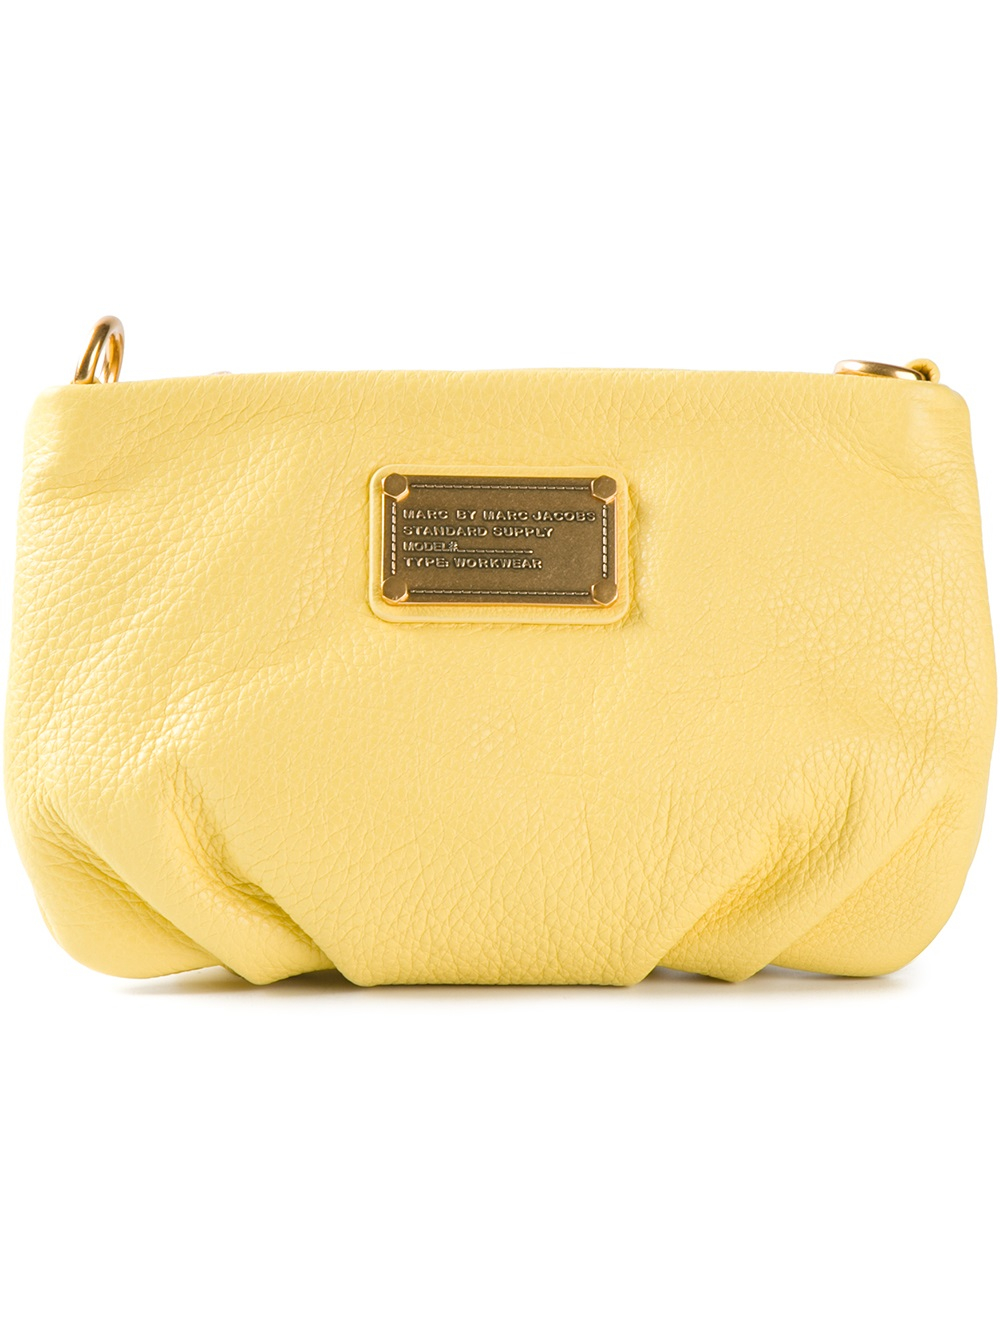 Marc By Marc Jacobs Classic Q Percy Crossbody Bag in Yellow & Orange  (Yellow) - Lyst